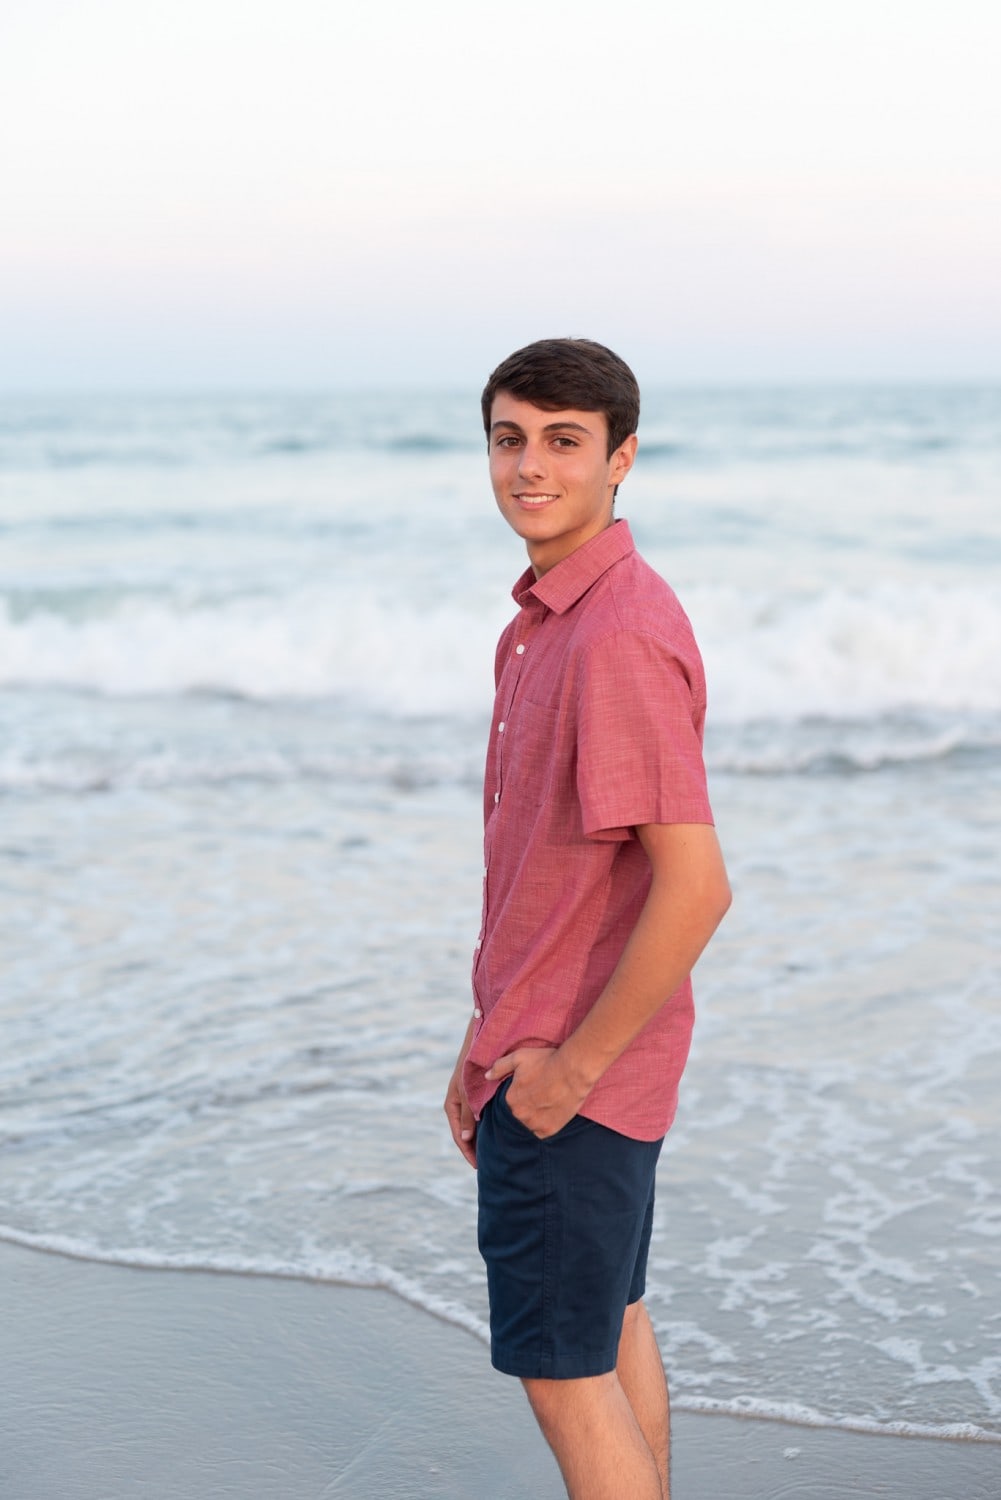 Individual portraits in front of the ocean - Huntington Beach State Park